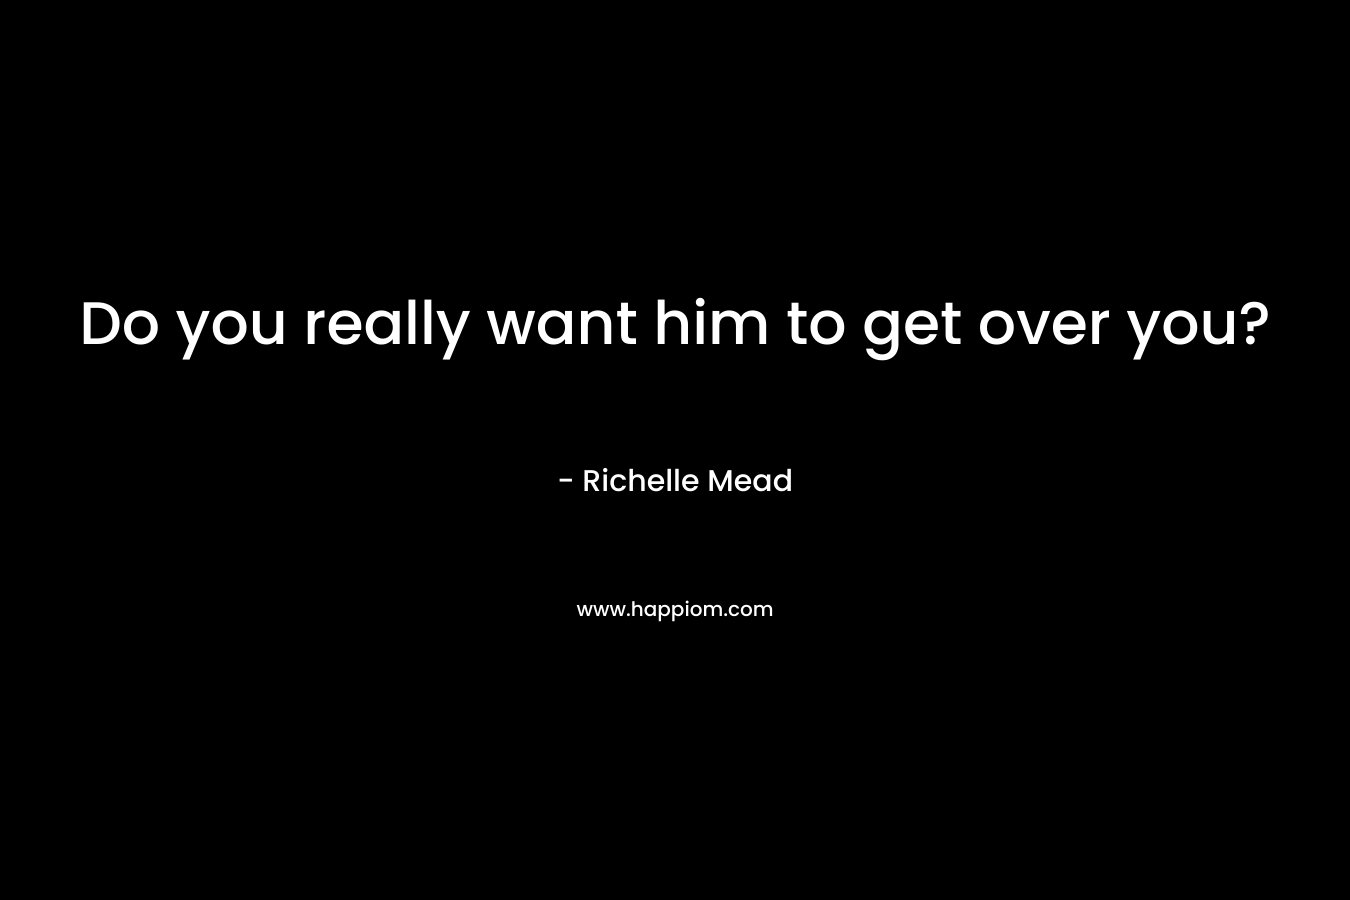 Do you really want him to get over you? – Richelle Mead